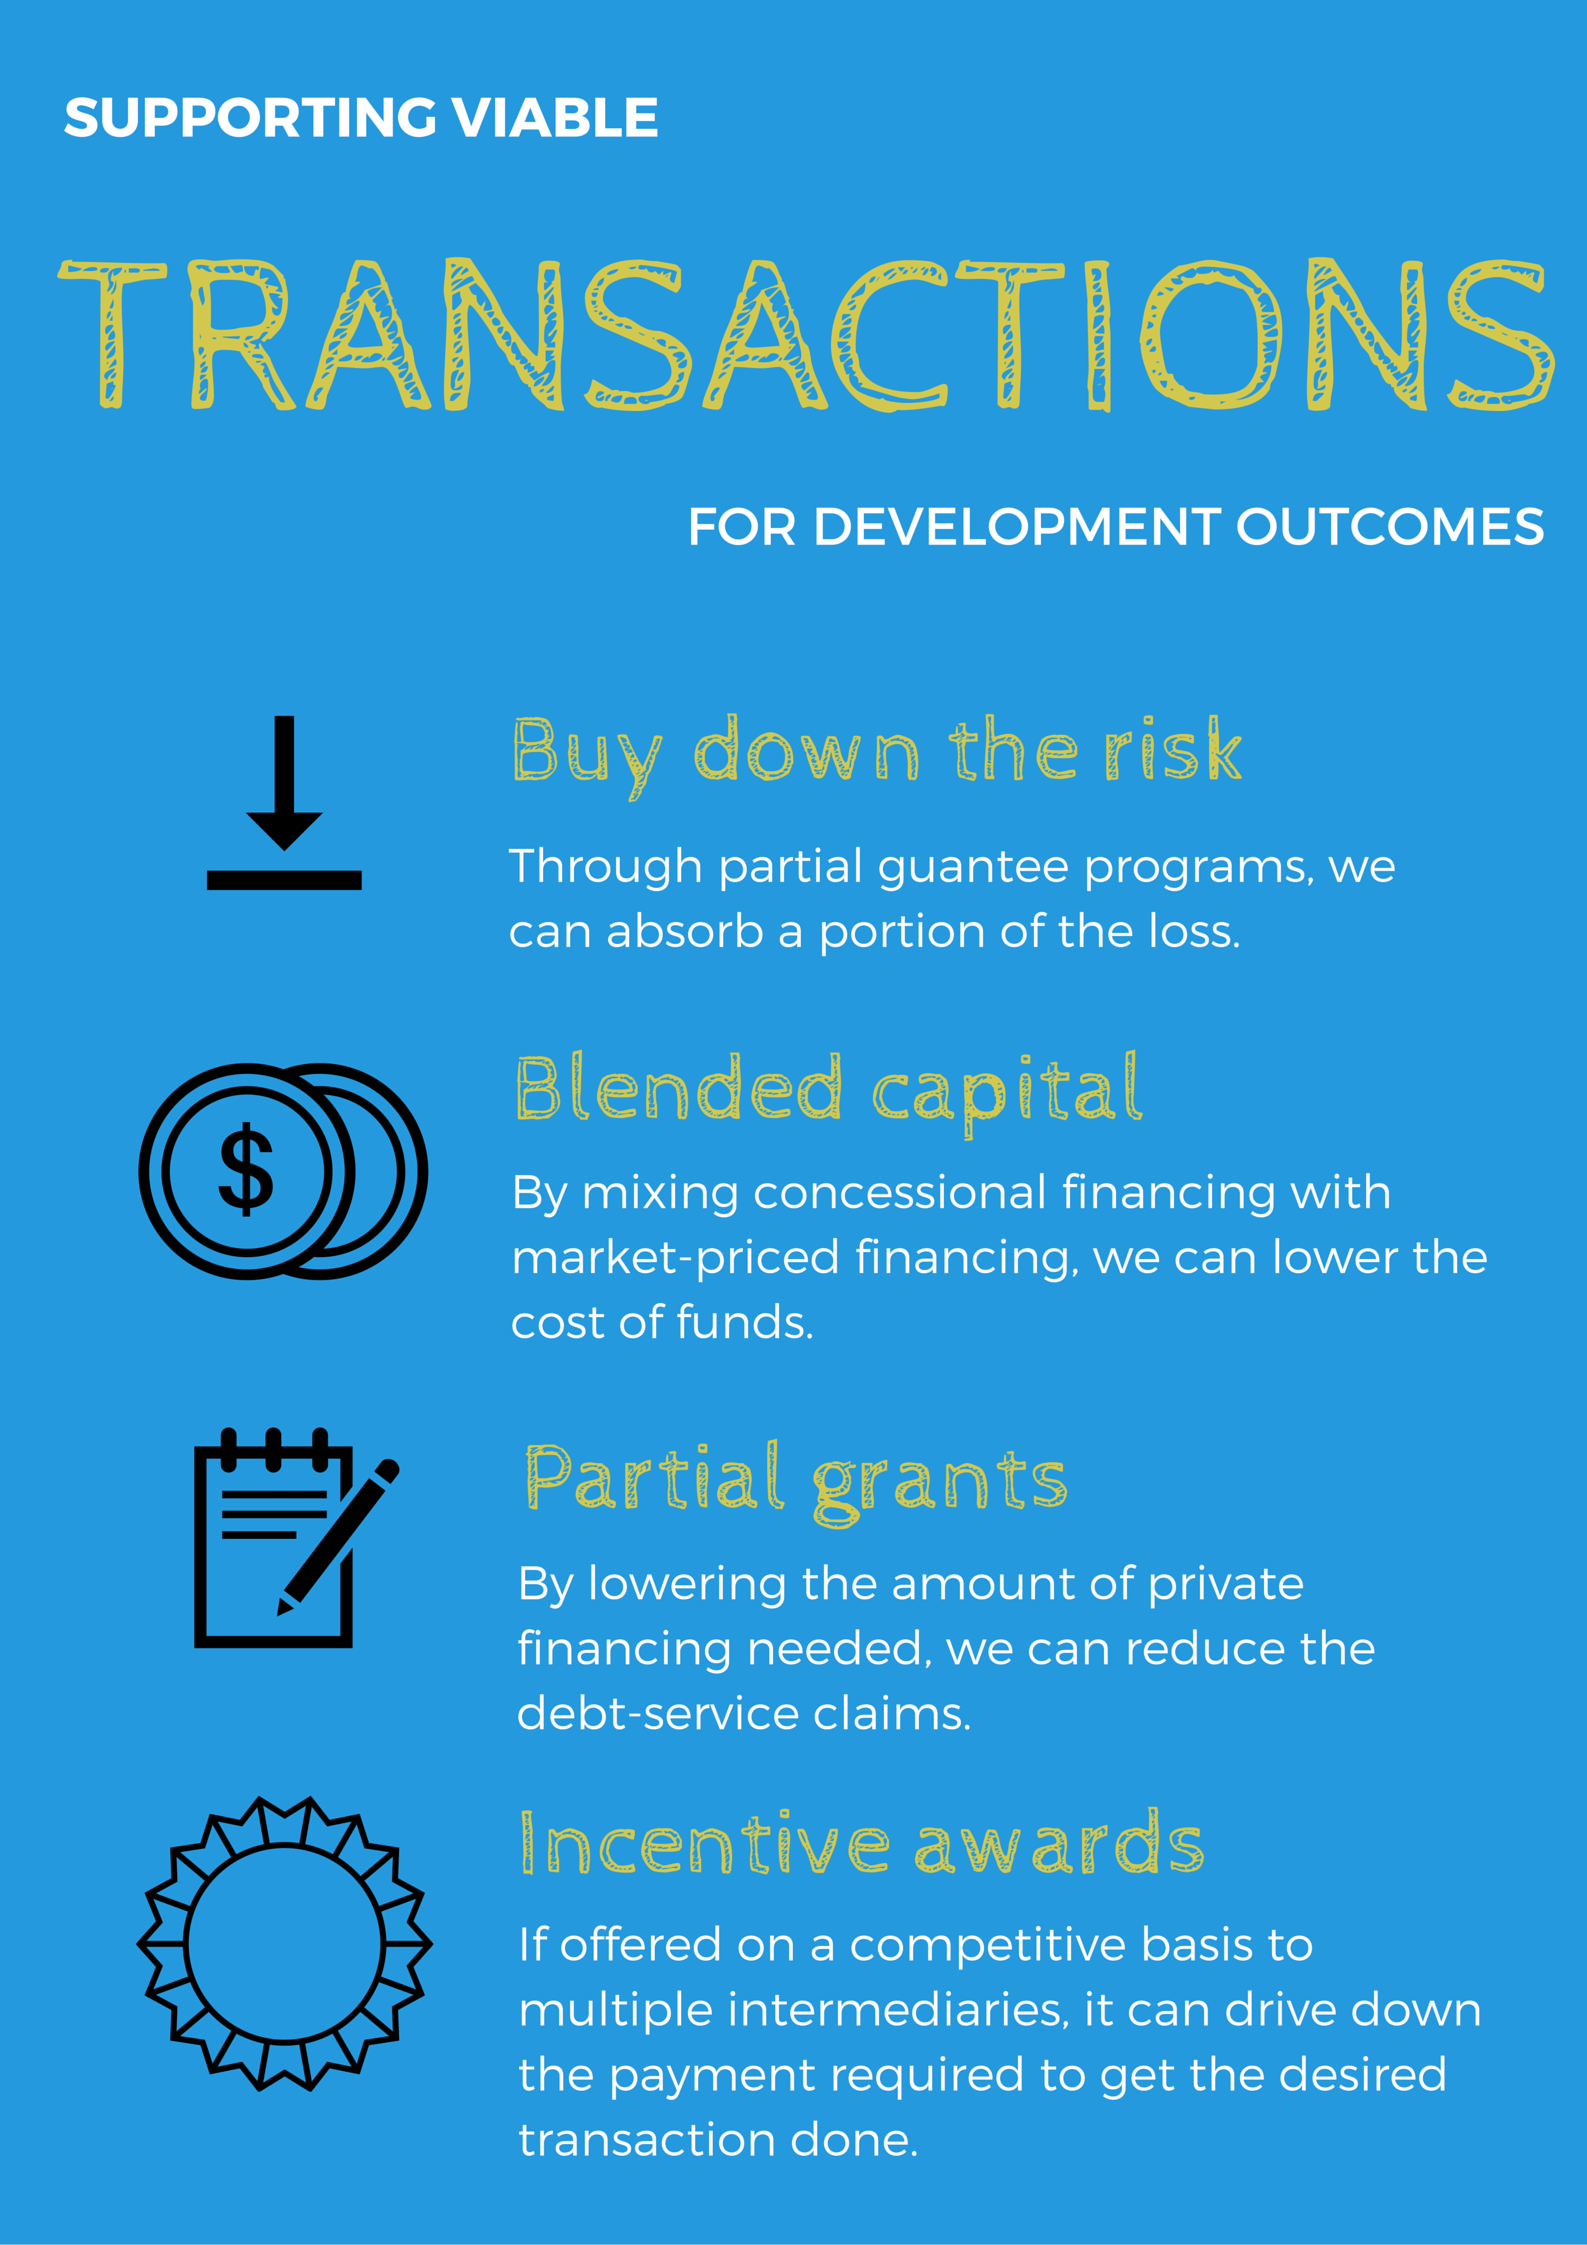 Viable Transactions for Development Outcomes